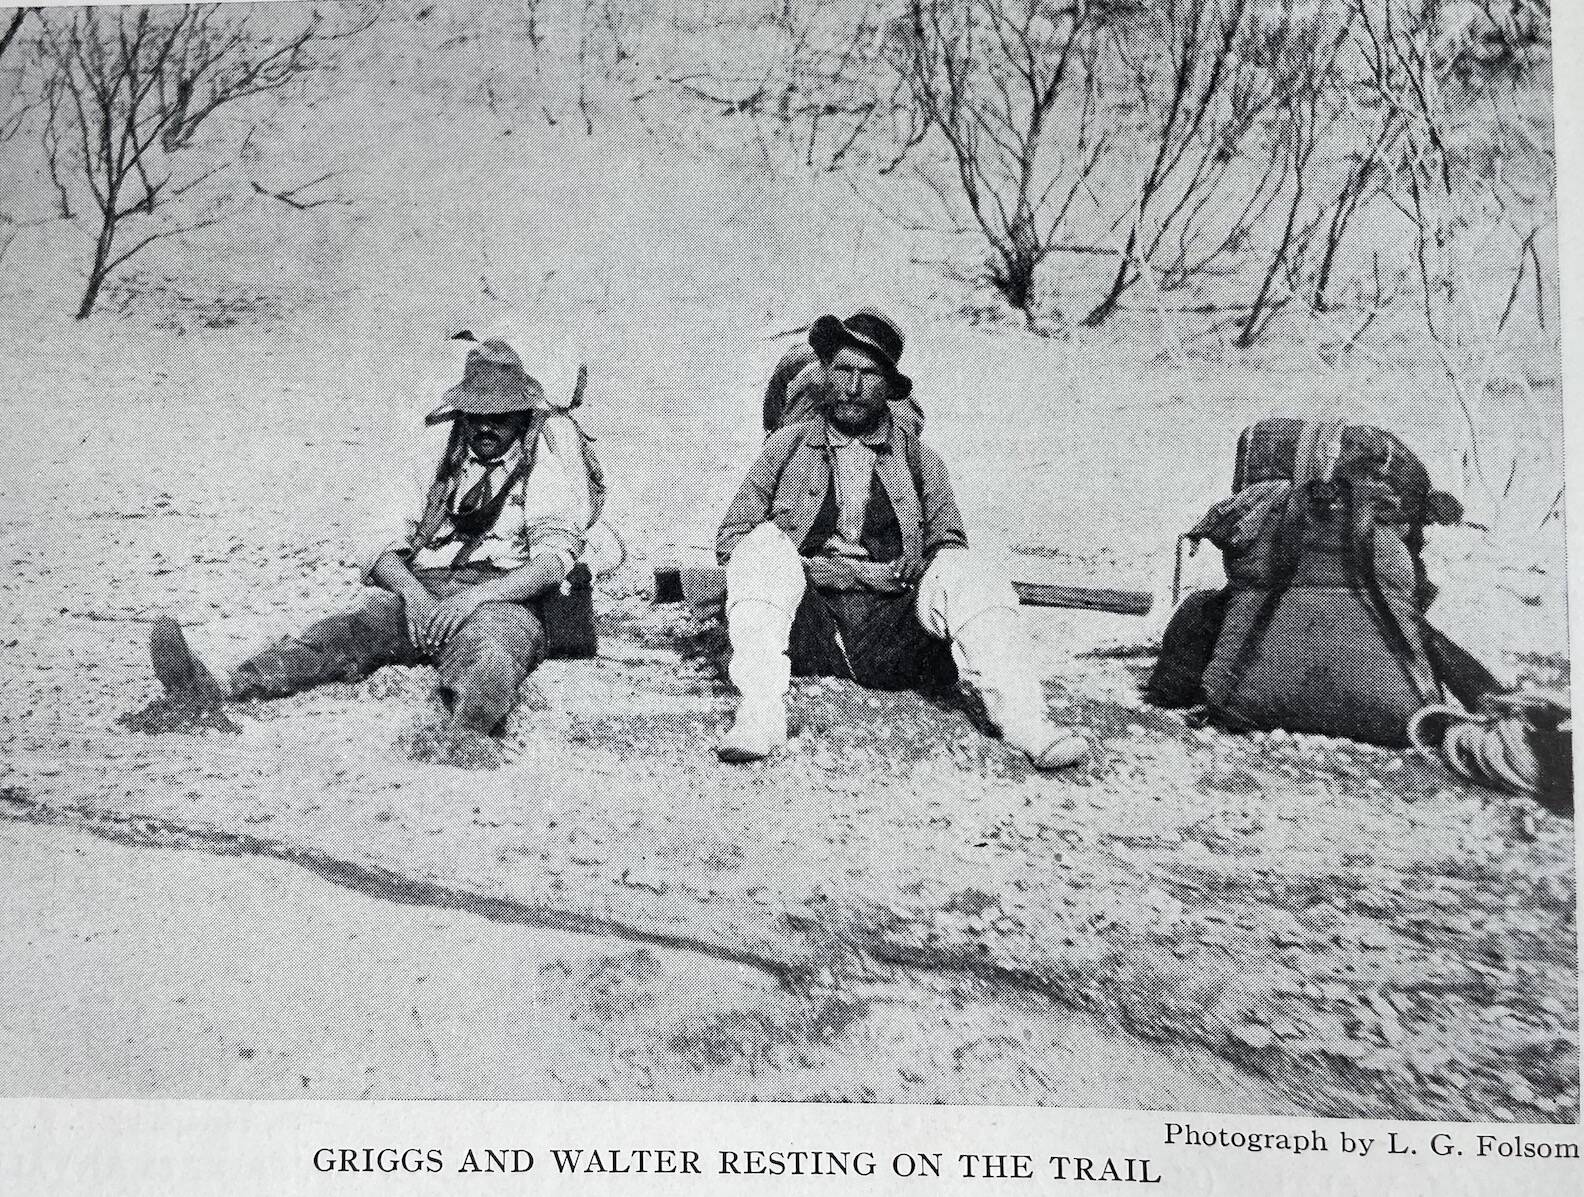 Robert Griggs, left, and Walter Metrokin of Kodiak rest during a 1916 expedition into the Valley of 10,000 Smokes on the Alaska Peninsula. (L.G. Folsom, from the book “The Valley of 10,000 Smokes” by Robert Griggs)